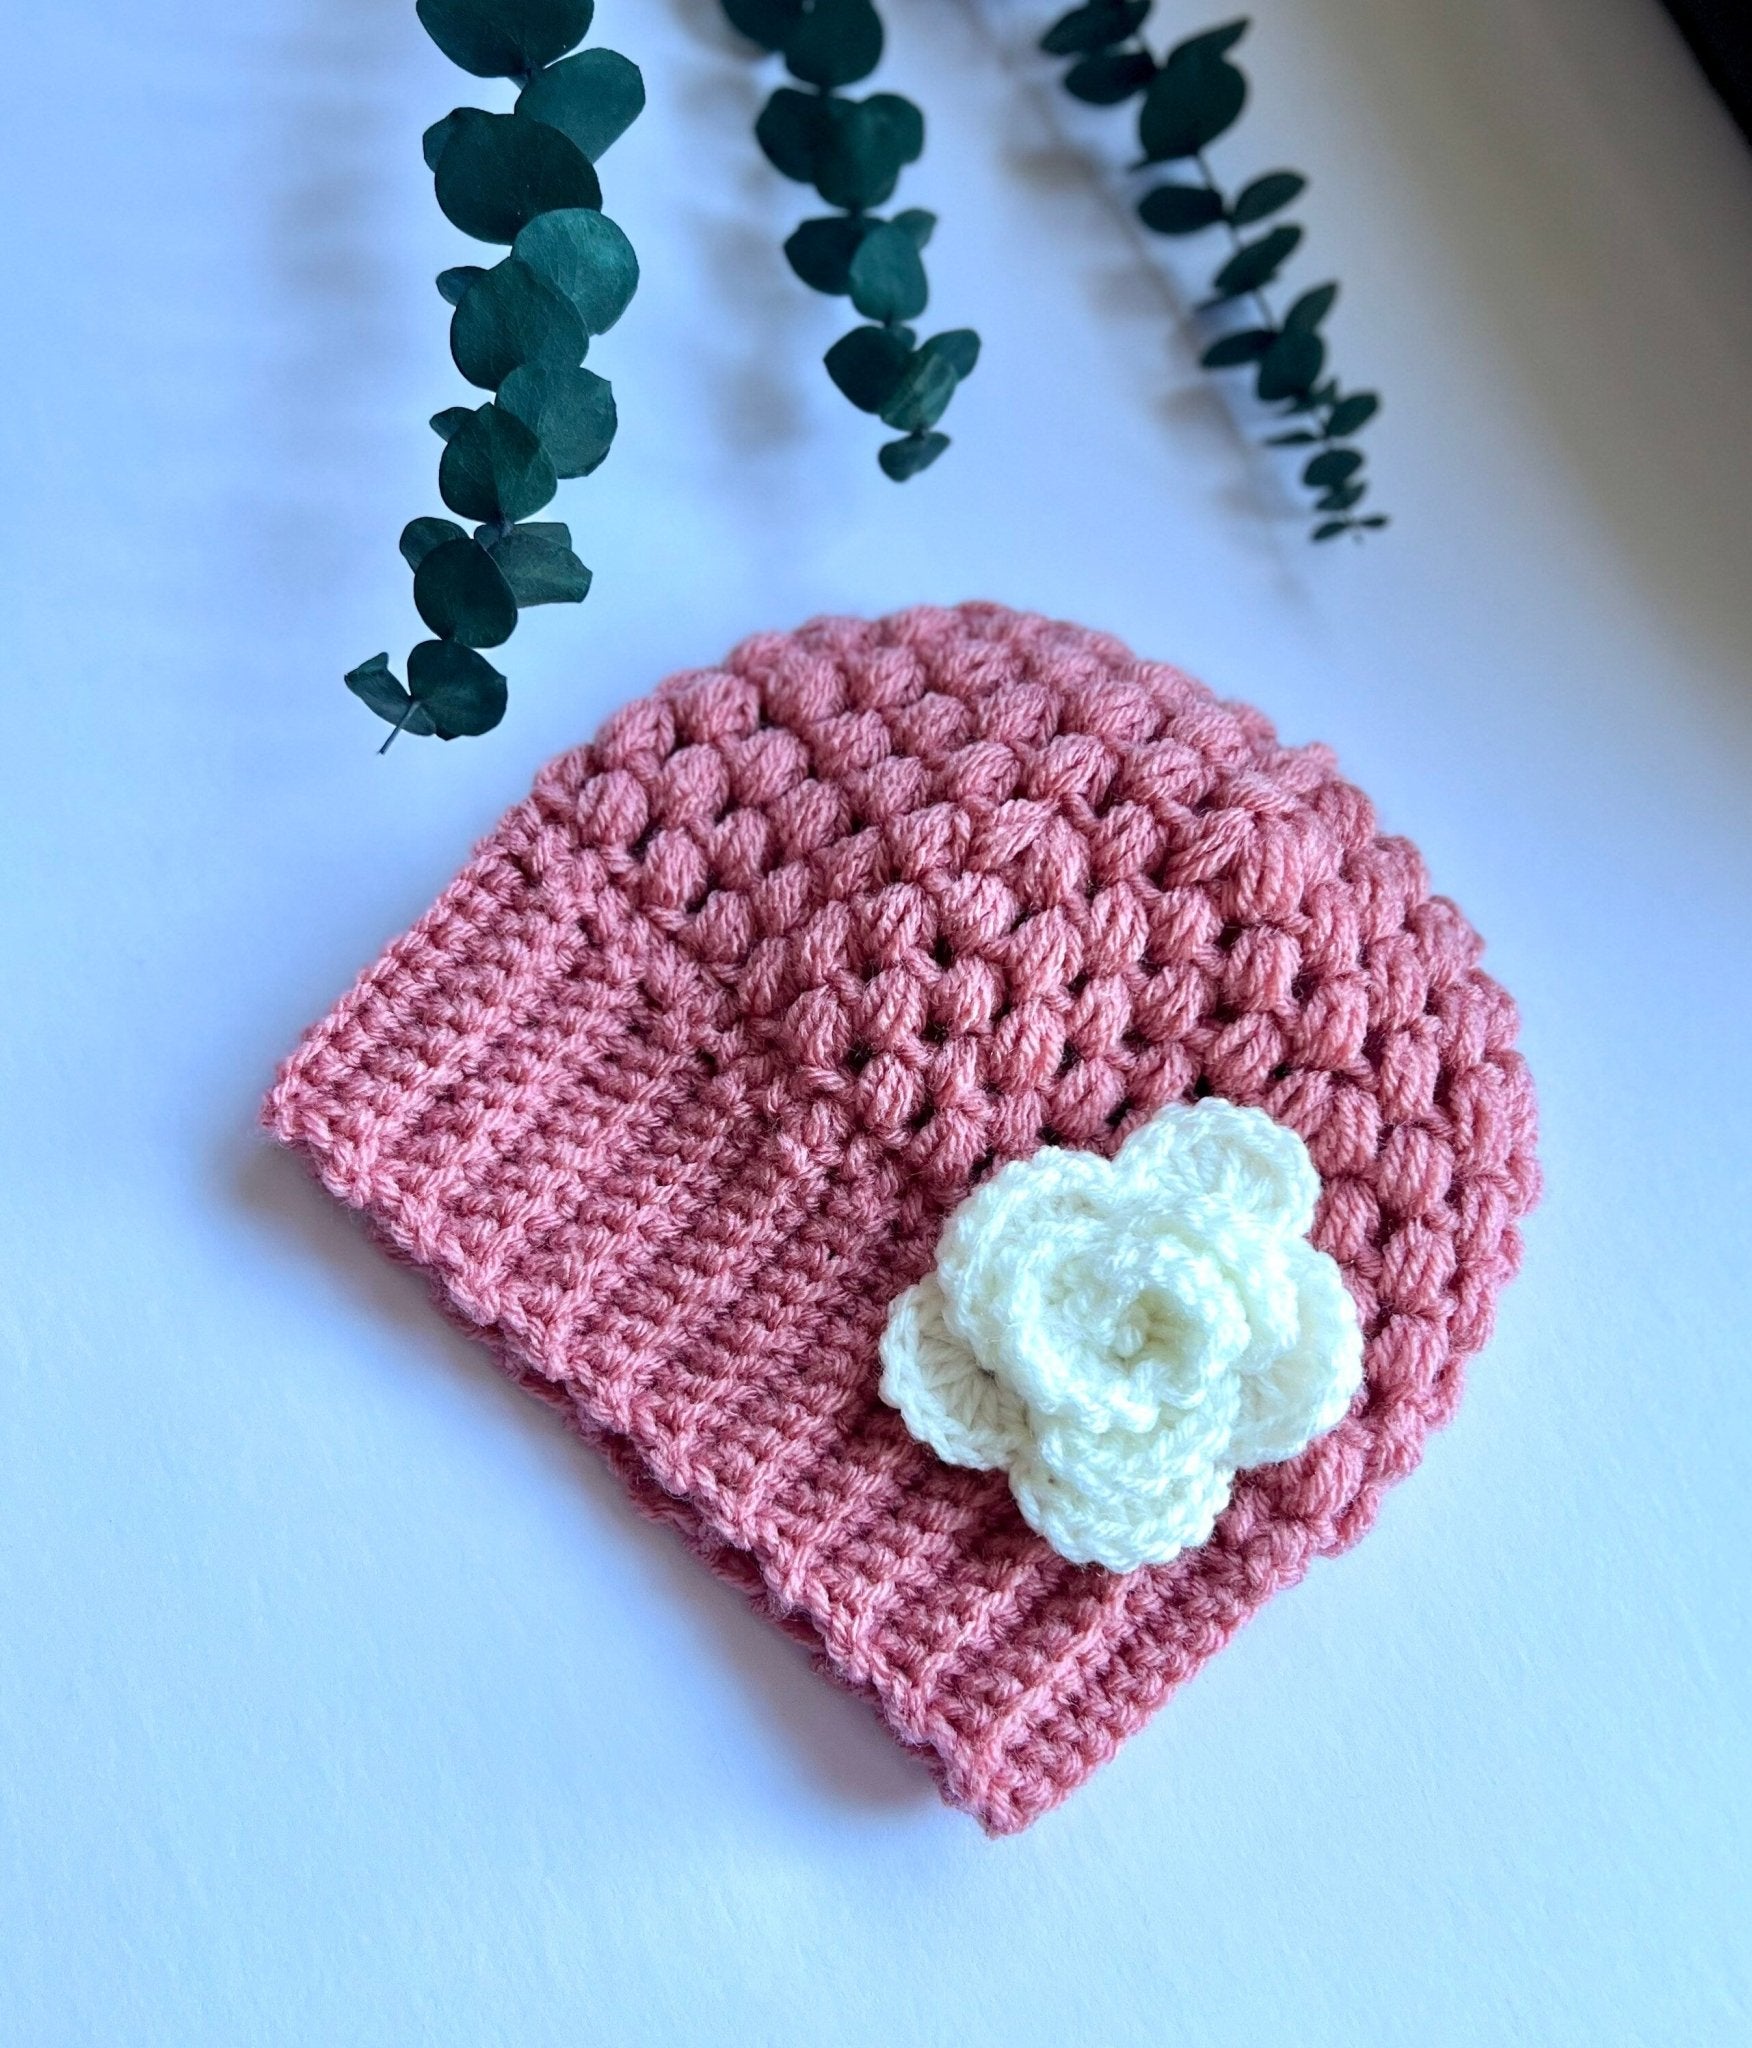 Stylish trendy crochet hat for girl dusty rose pink with white crochet flower, fall or winter weather crochet hat , “mom and me” hat set, - Lilly Grace Sparkle Boutique